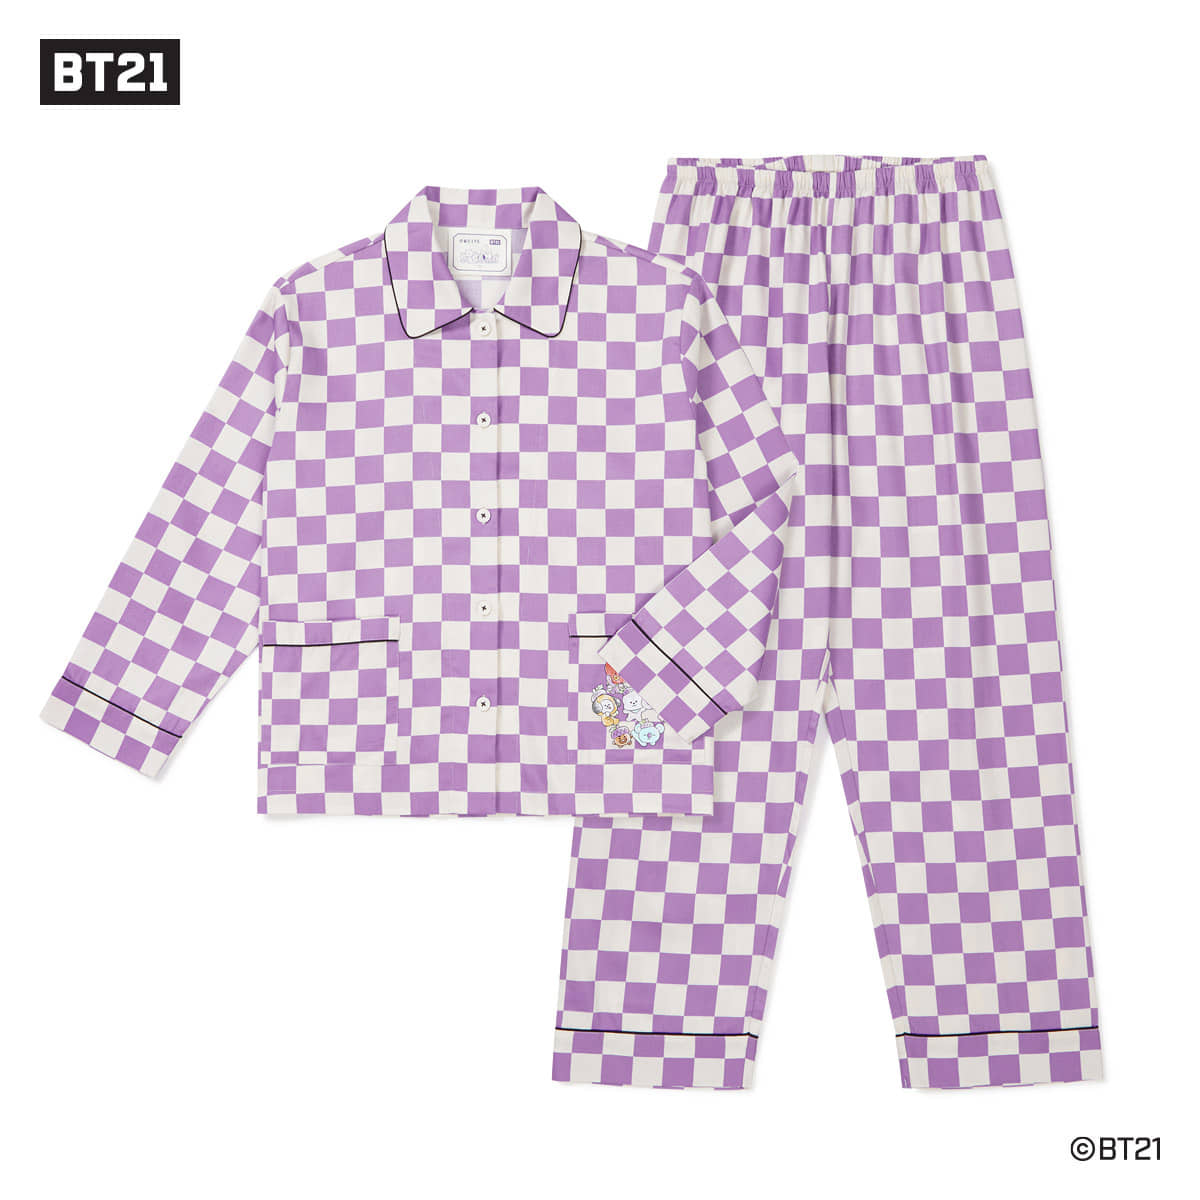 BT21 special edition Pajama long sleeve For women